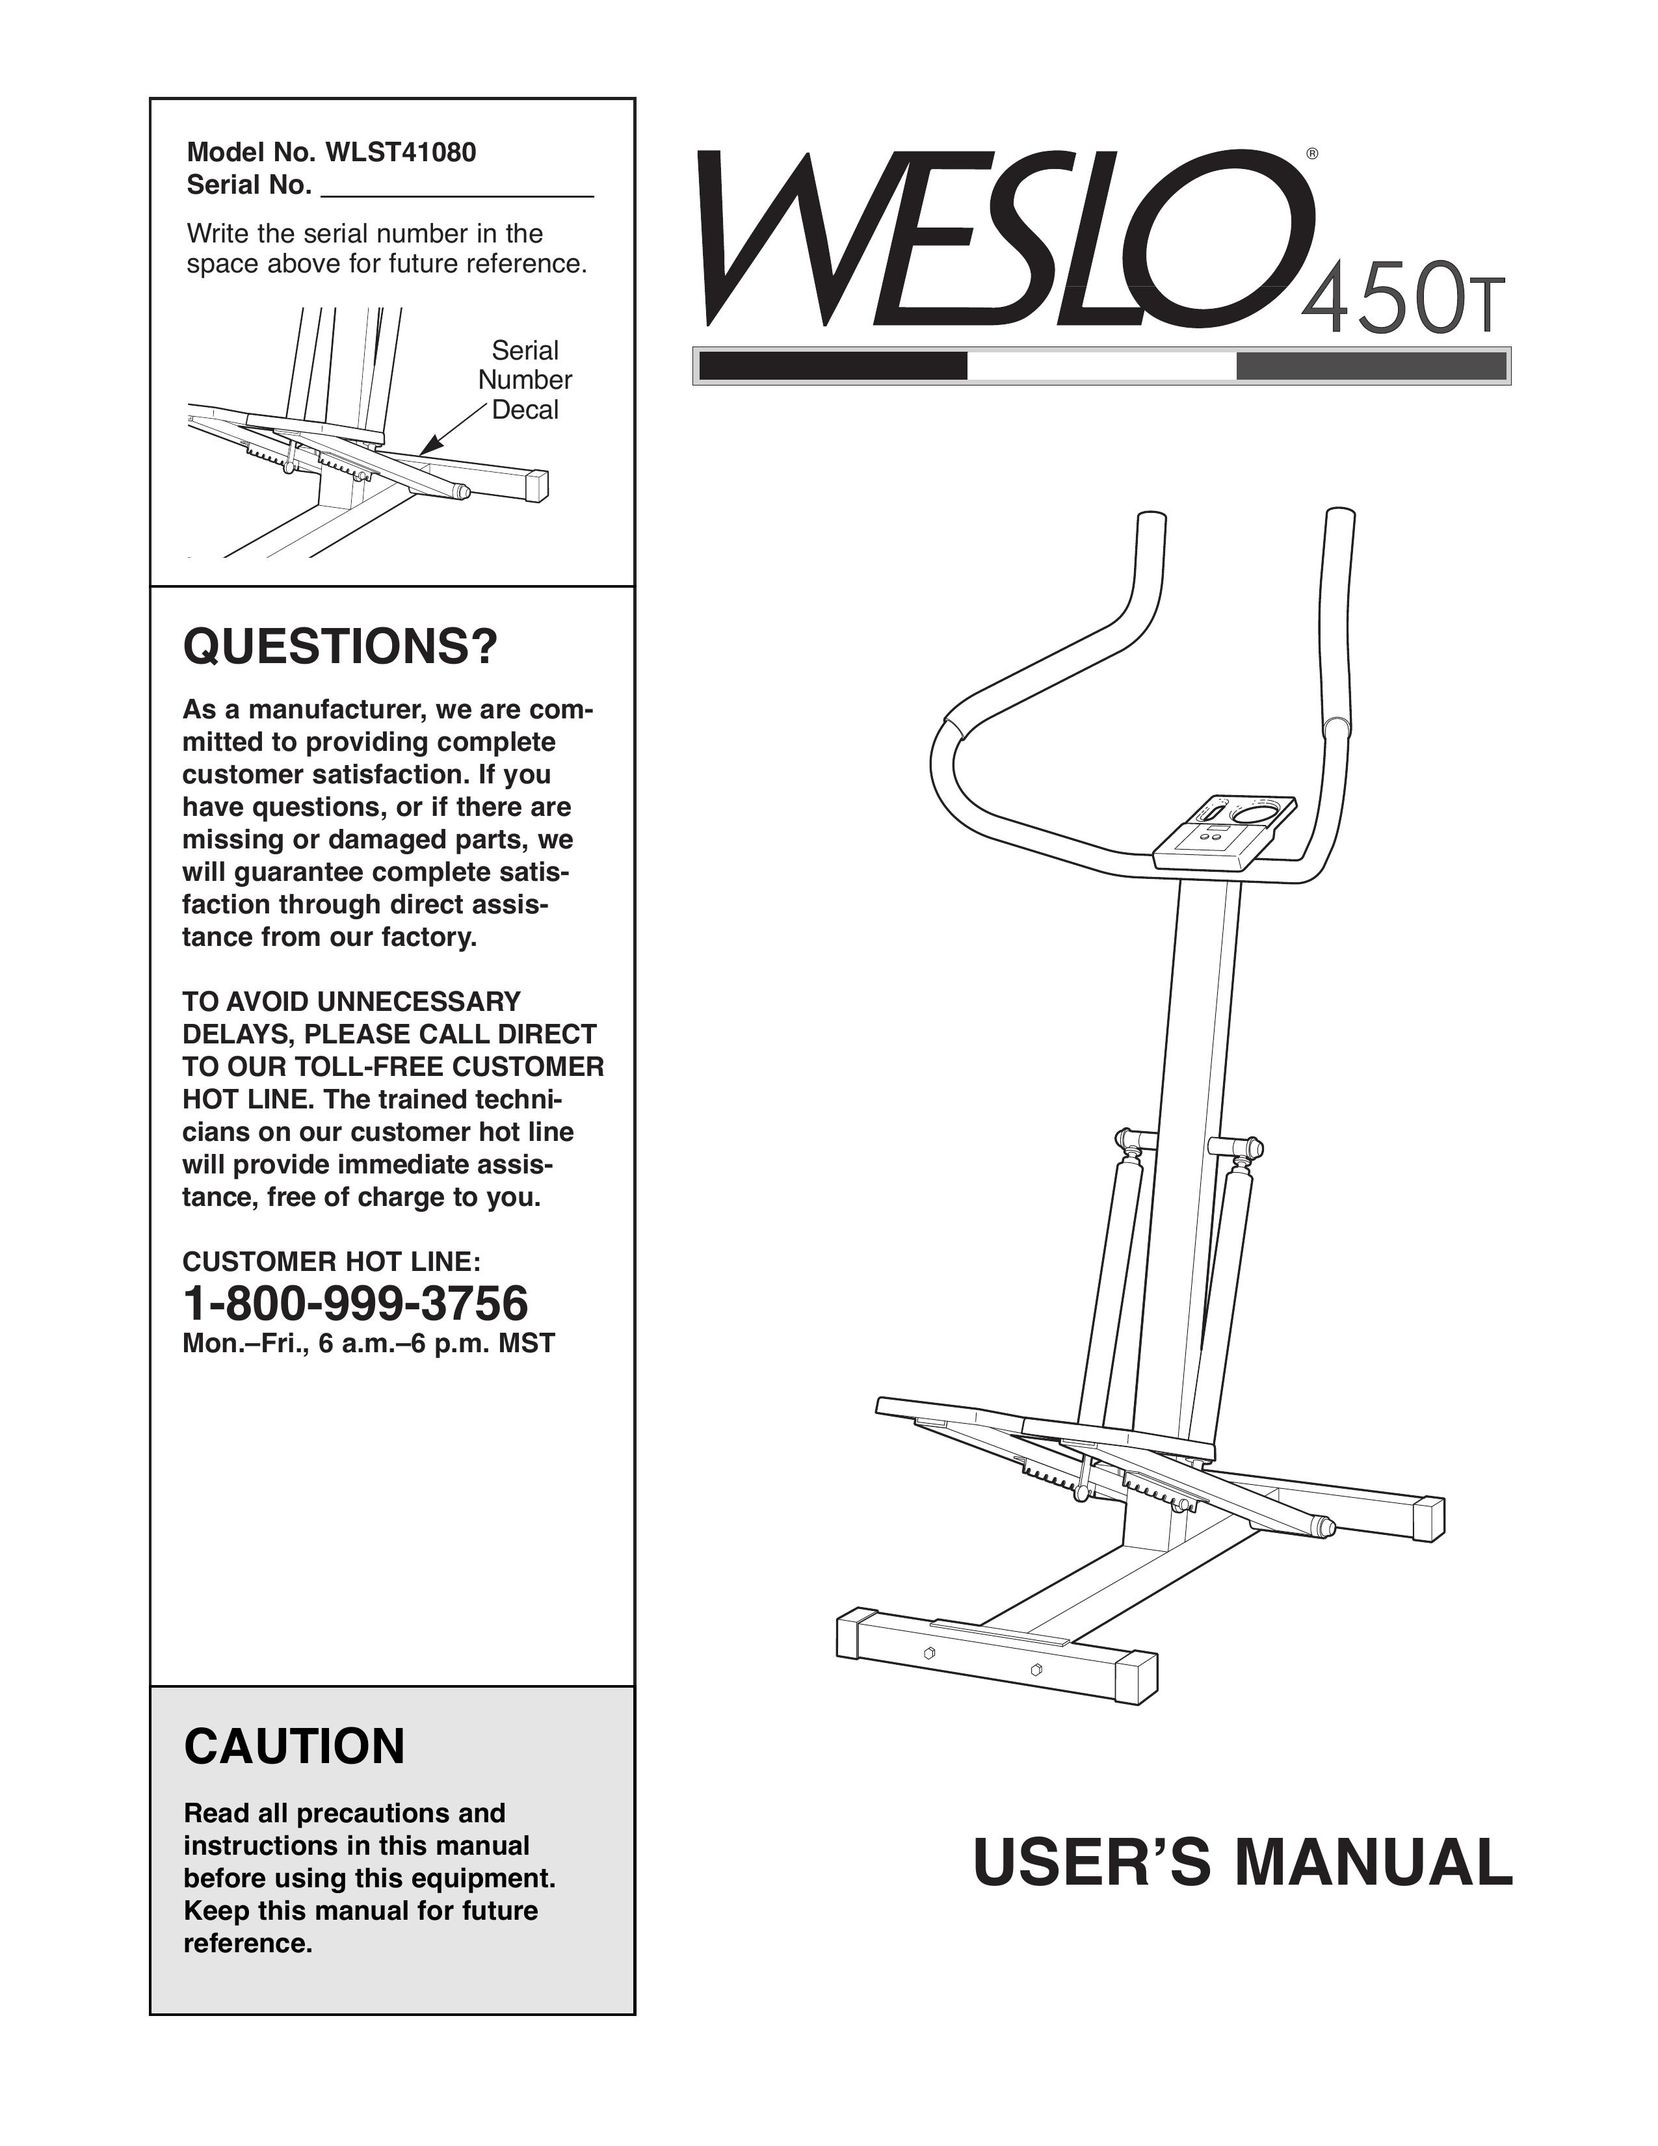 Weslo 450T Home Gym User Manual